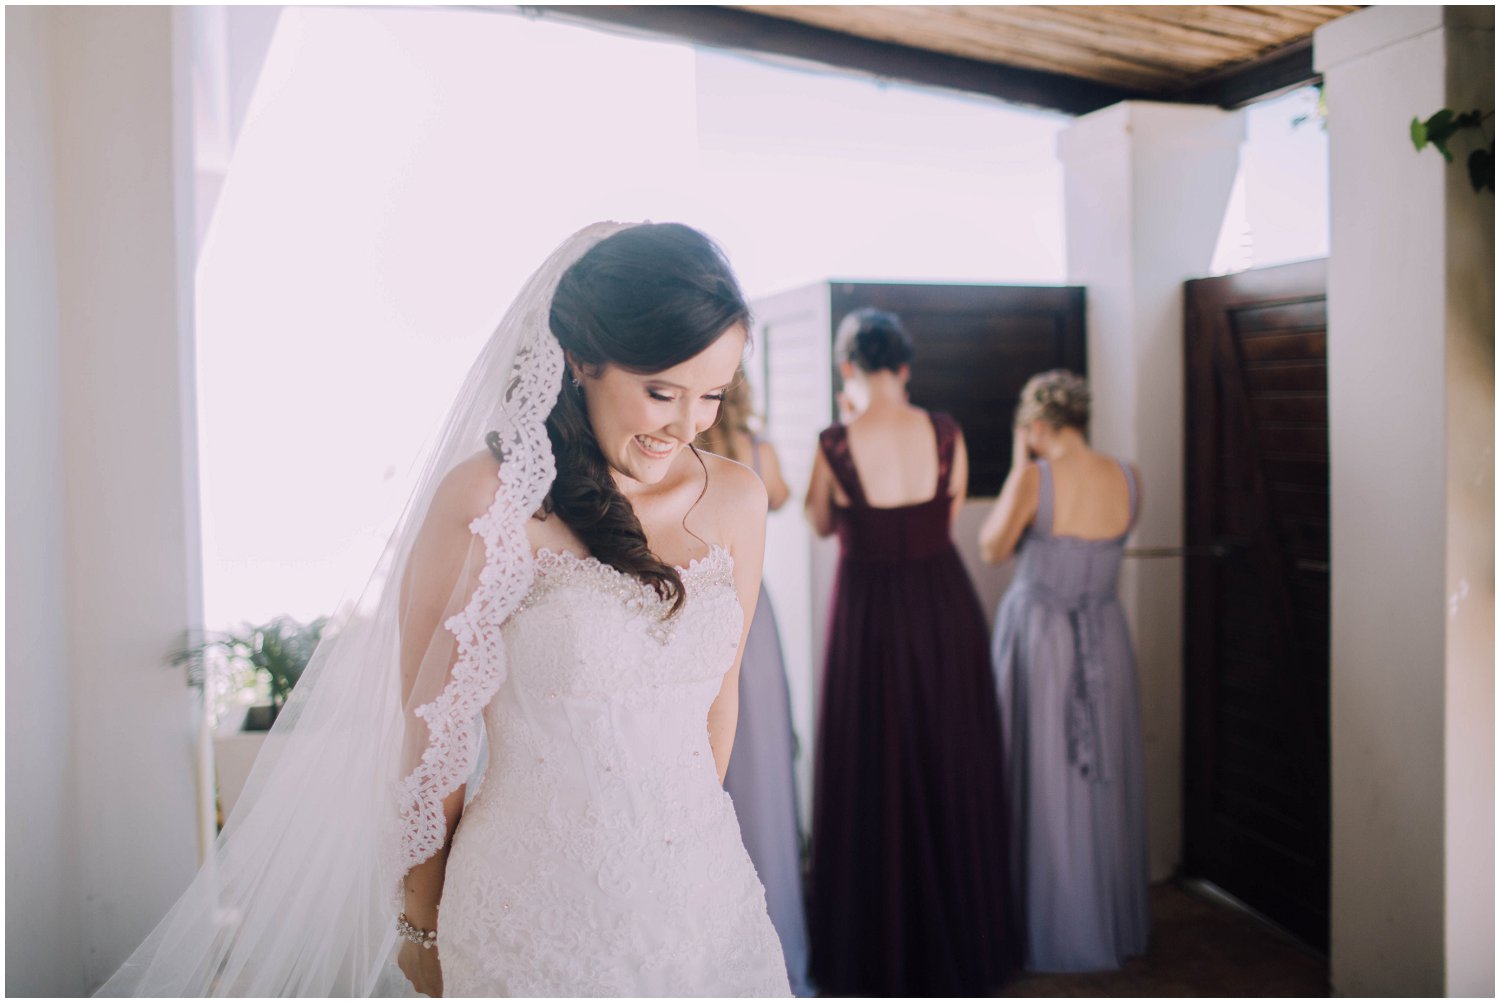 Top Artistic Creative Documentary Wedding Photographer Cape Town South Africa Rue Kruger_0239.jpg